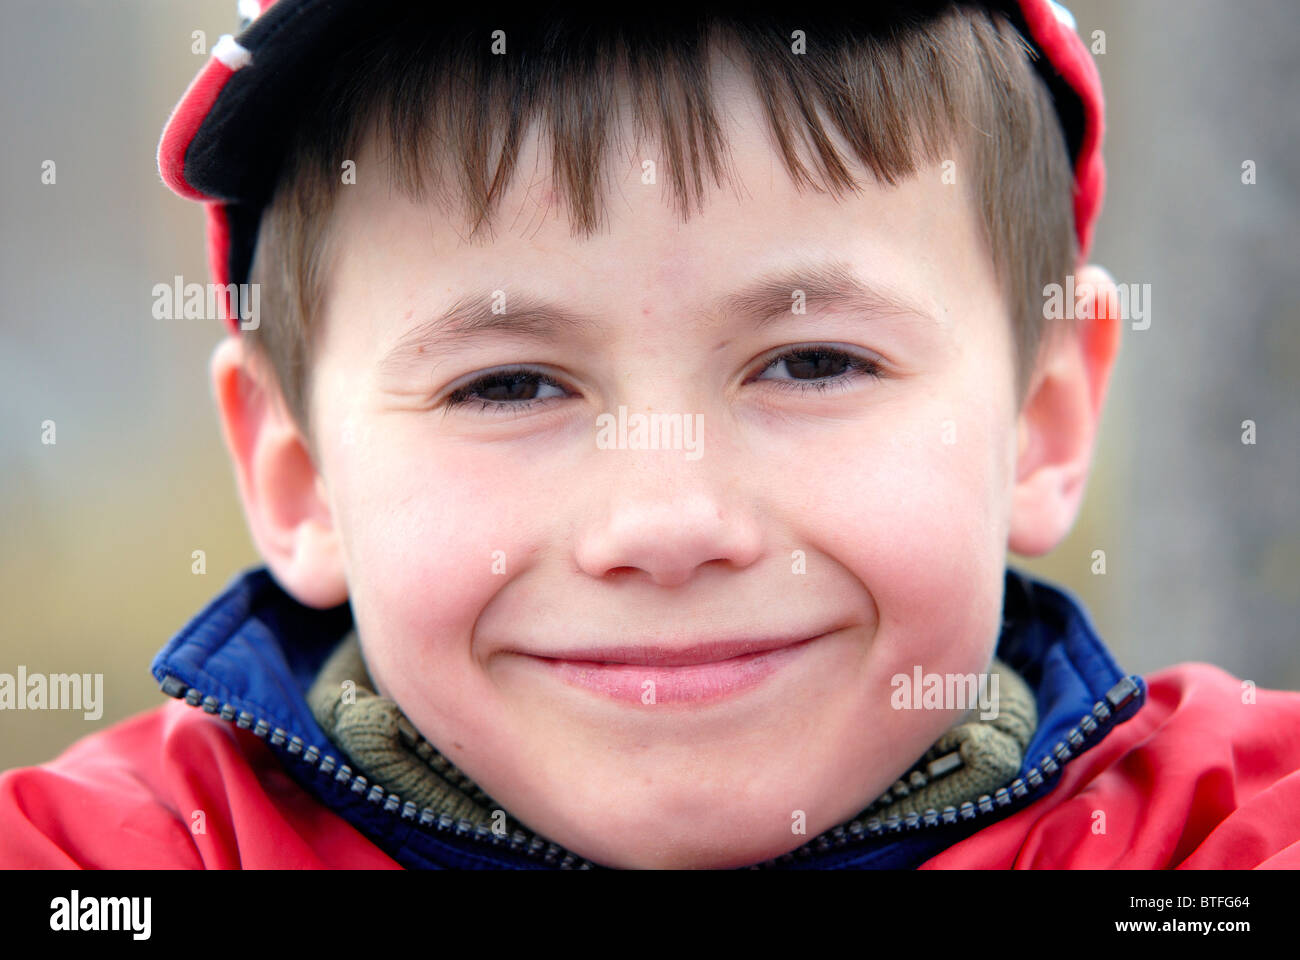 Portrait of a smiling young Boy Stock Photo